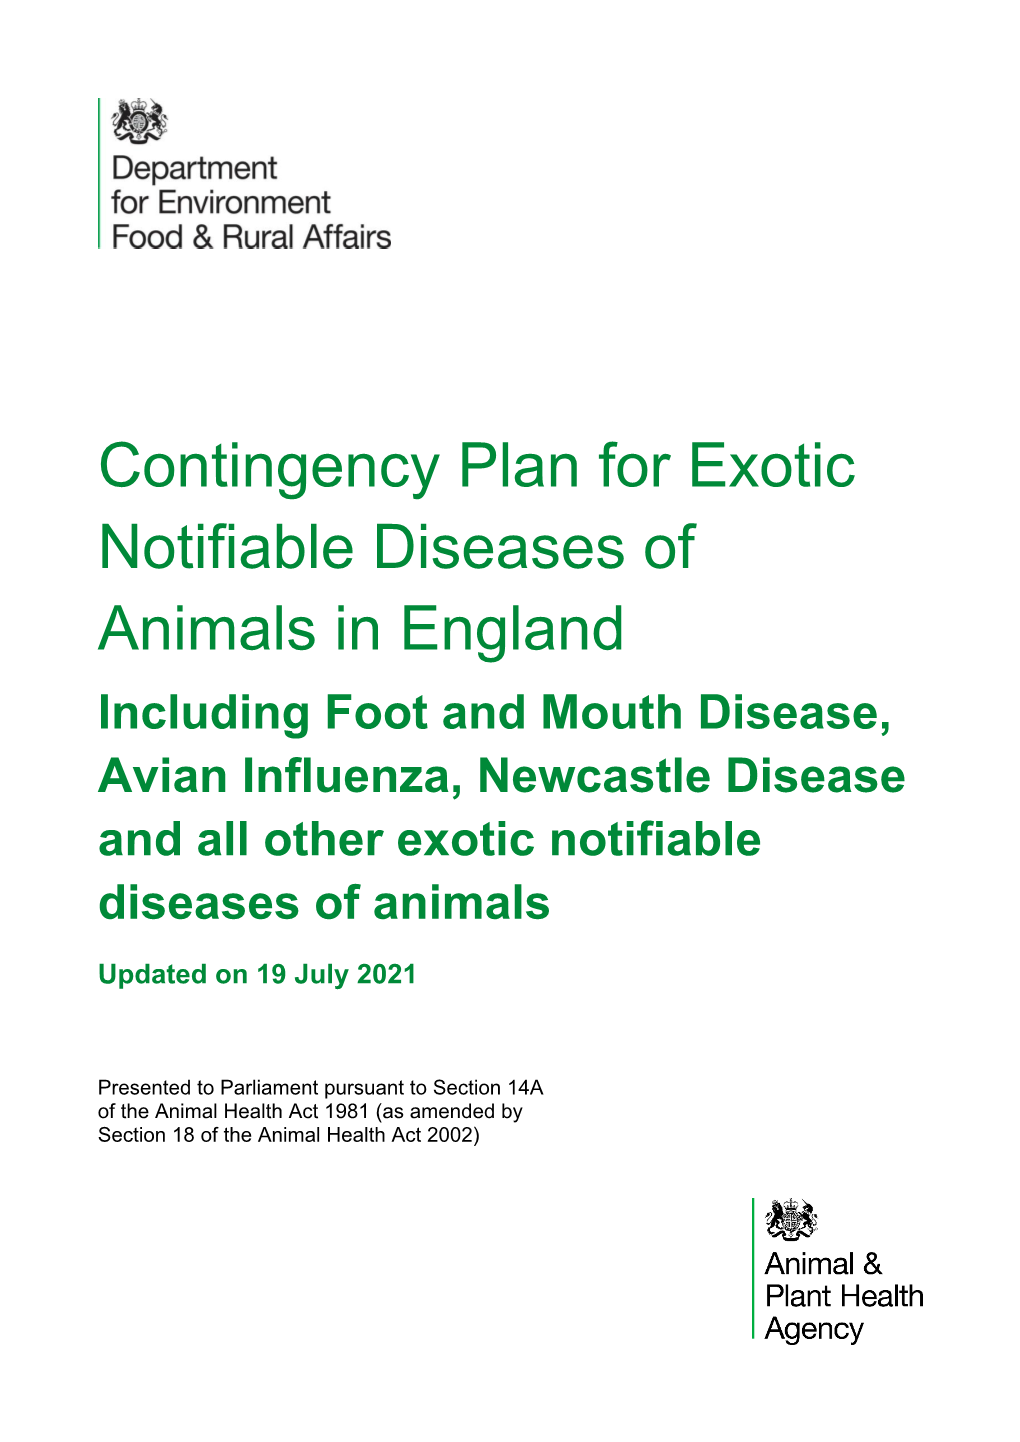 Contingency Plan for Exotic Notifiable Diseases of Animals in England